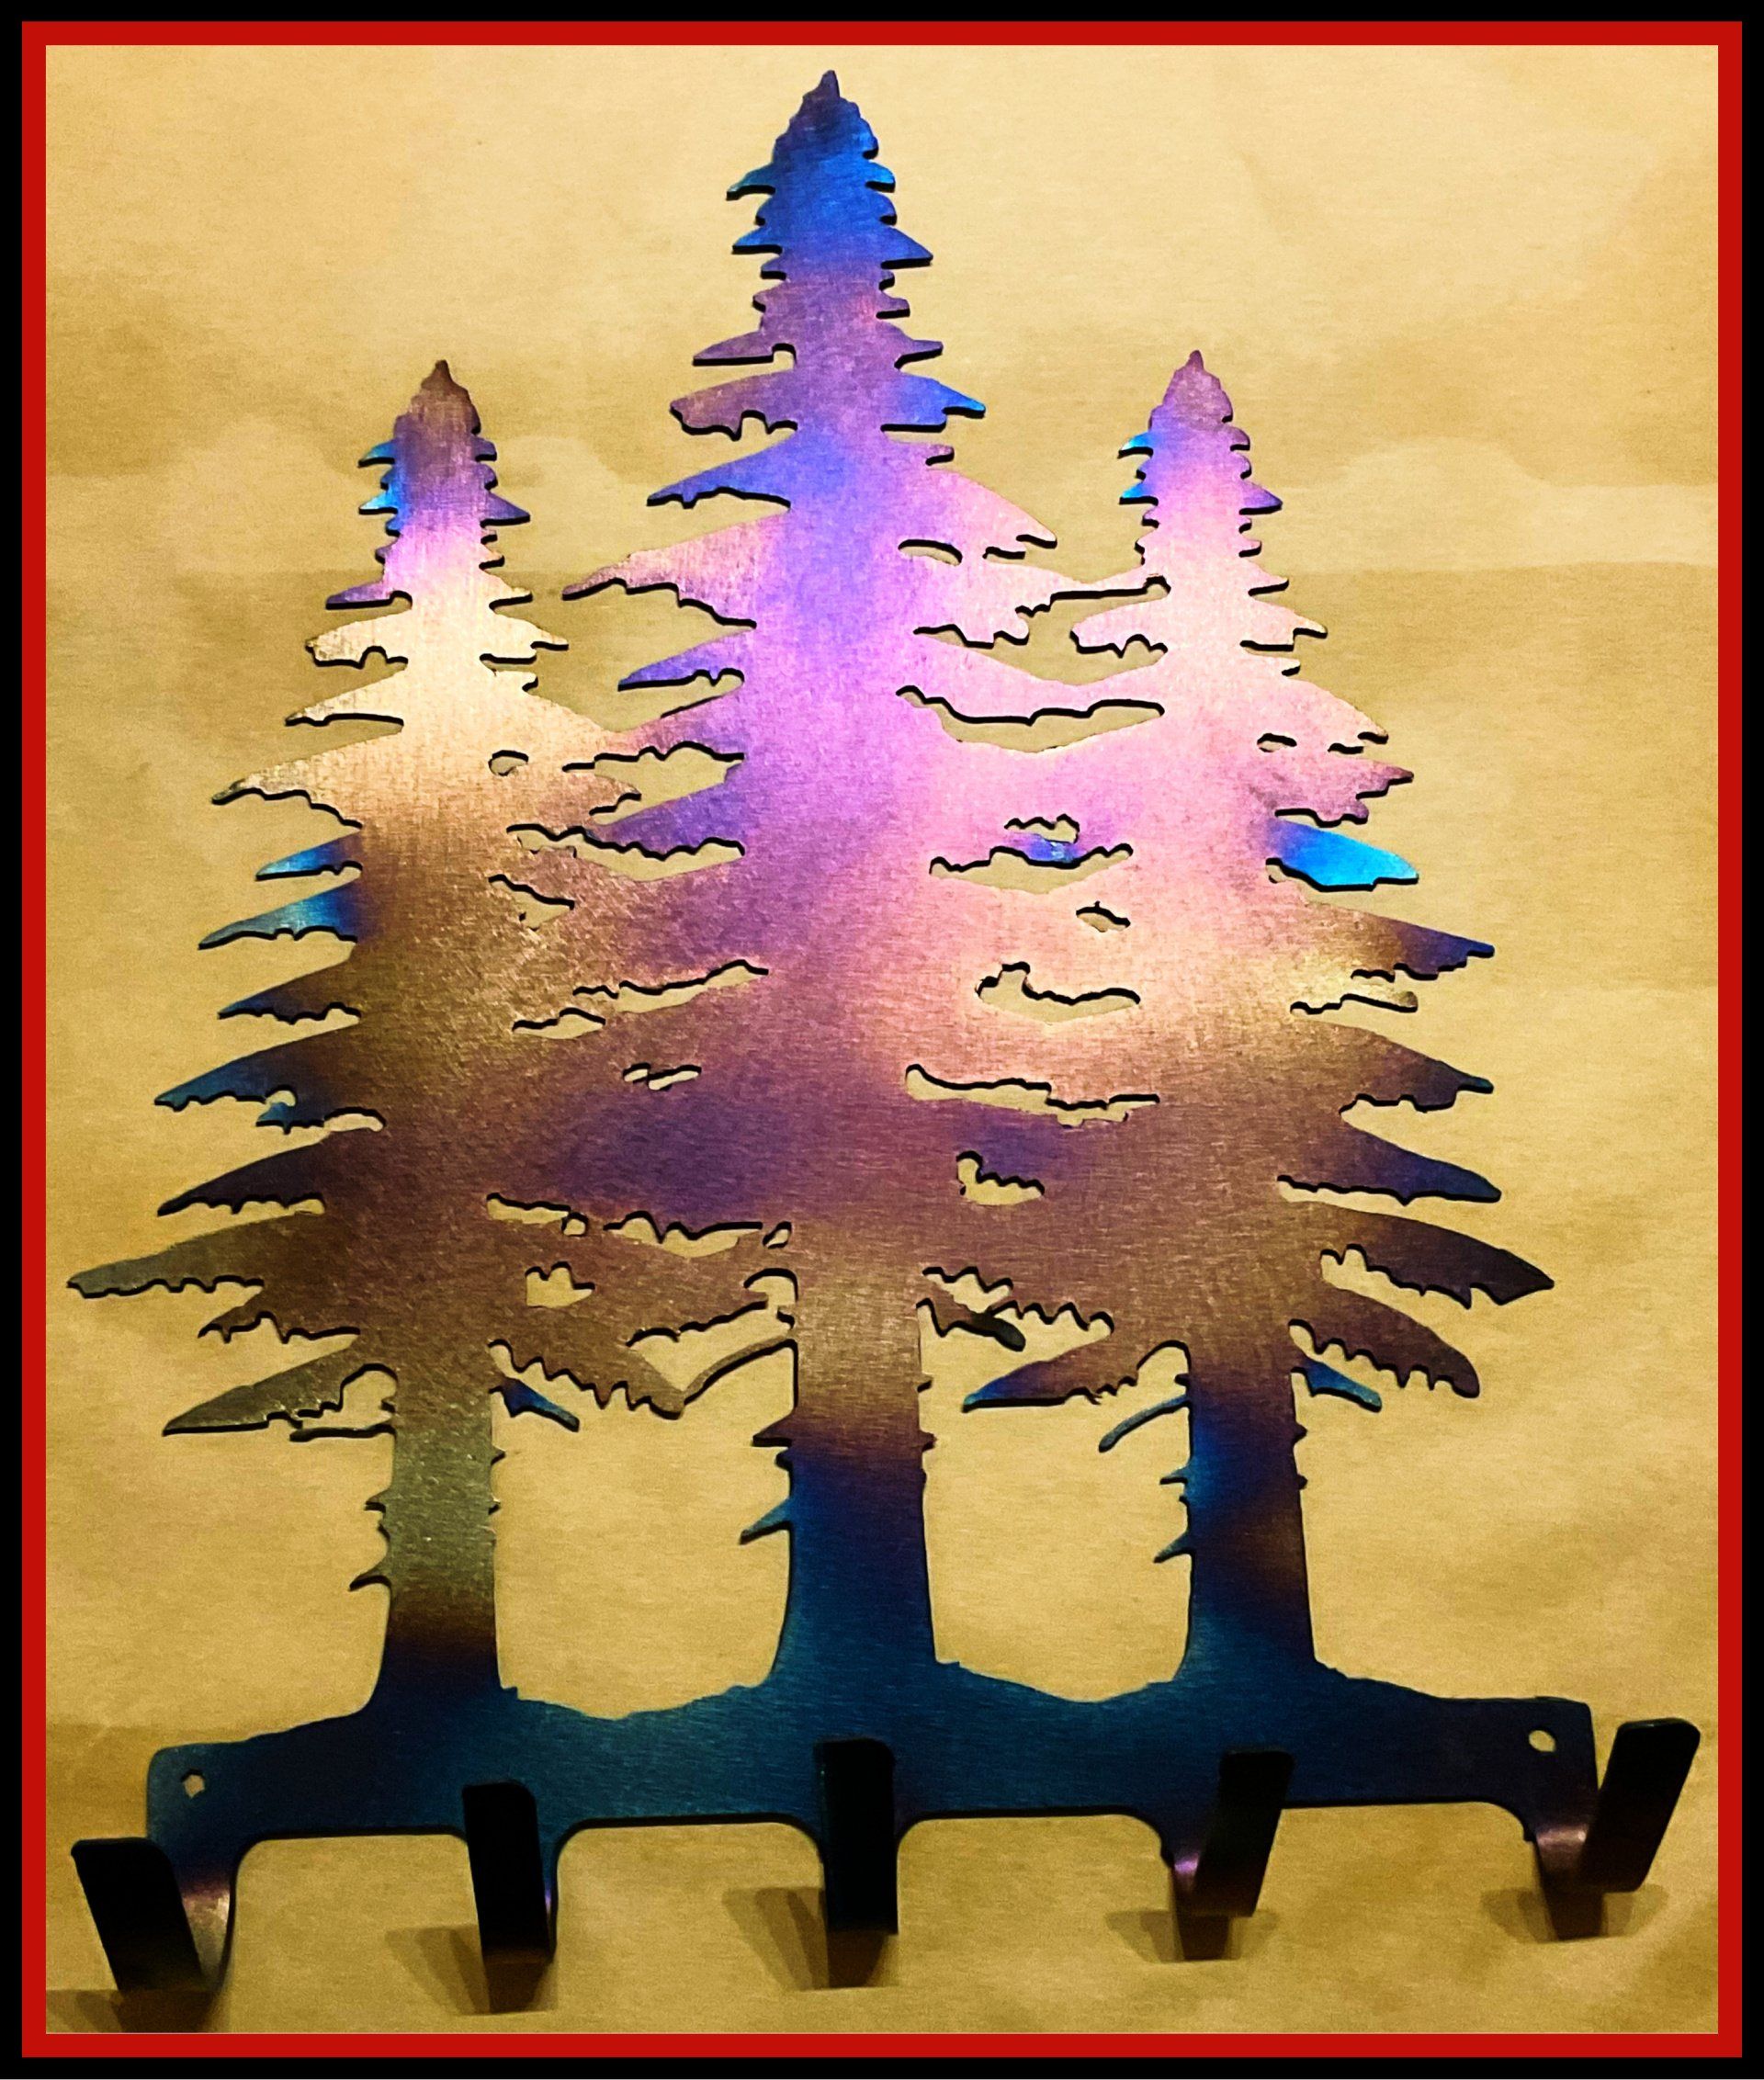 a metal sculpture of three trees with a purple sky in the background